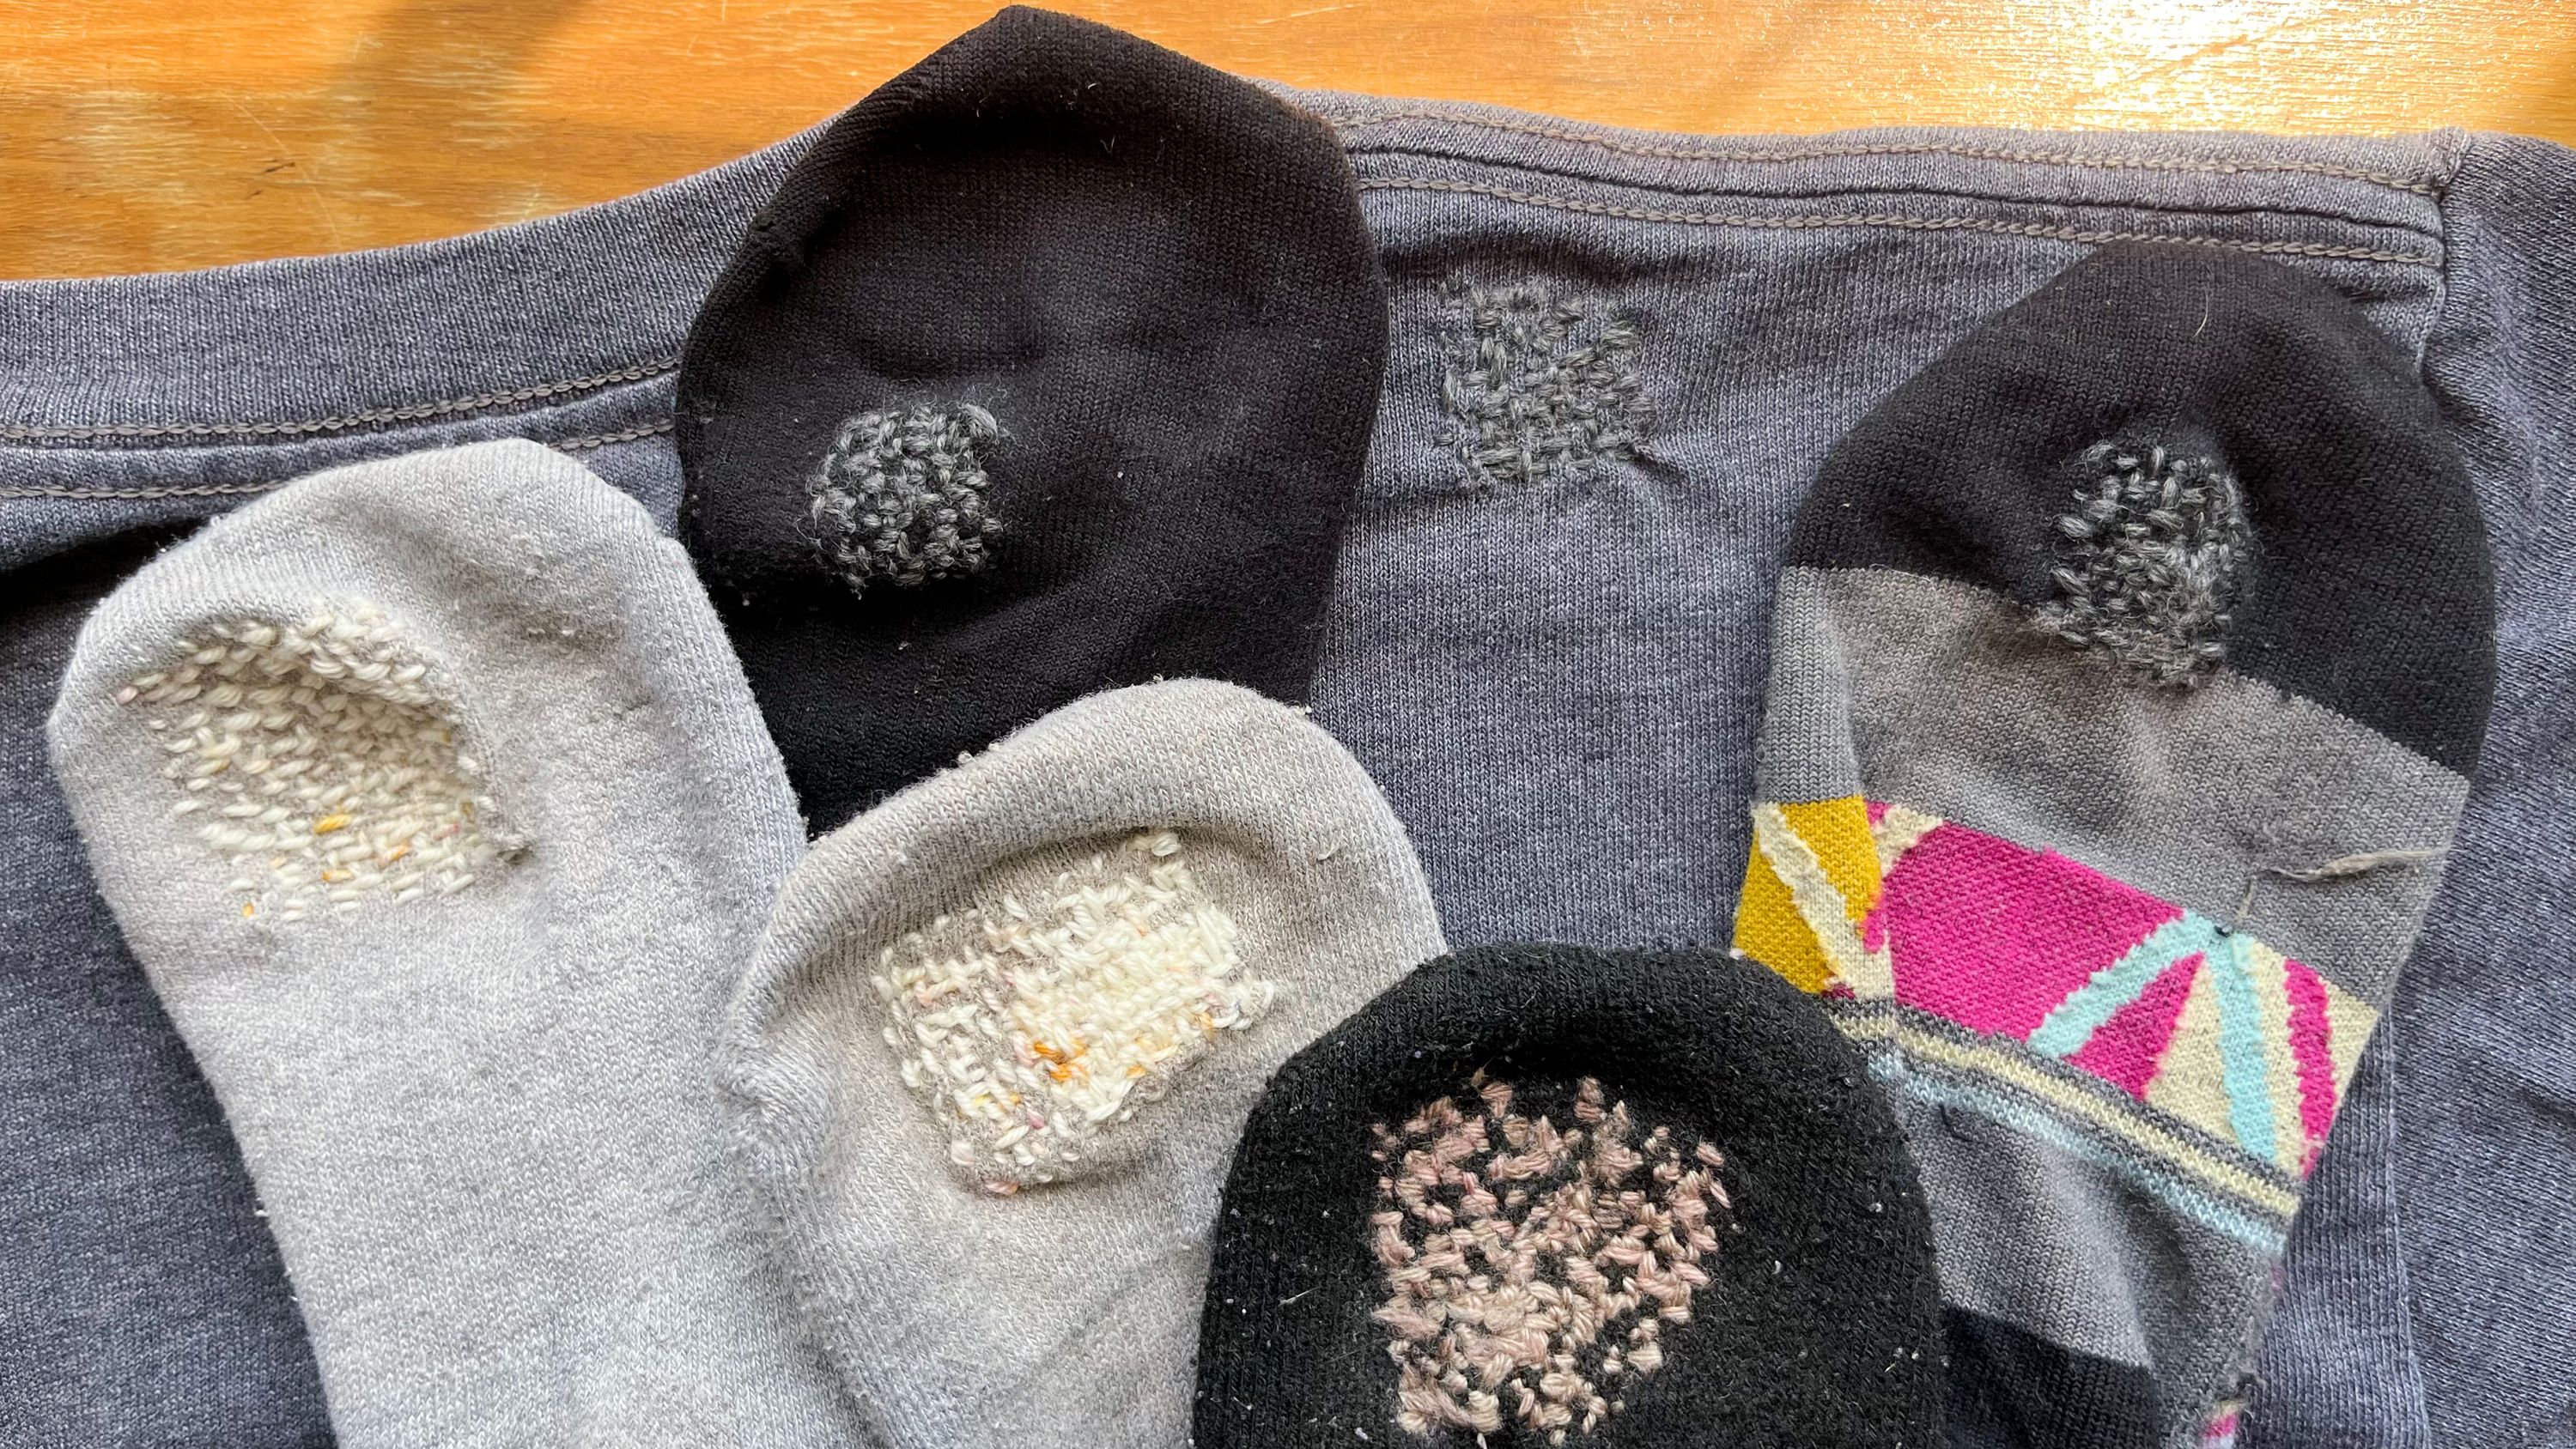 A collection of socks and t-shirts with small mends/reinforcing stitches.